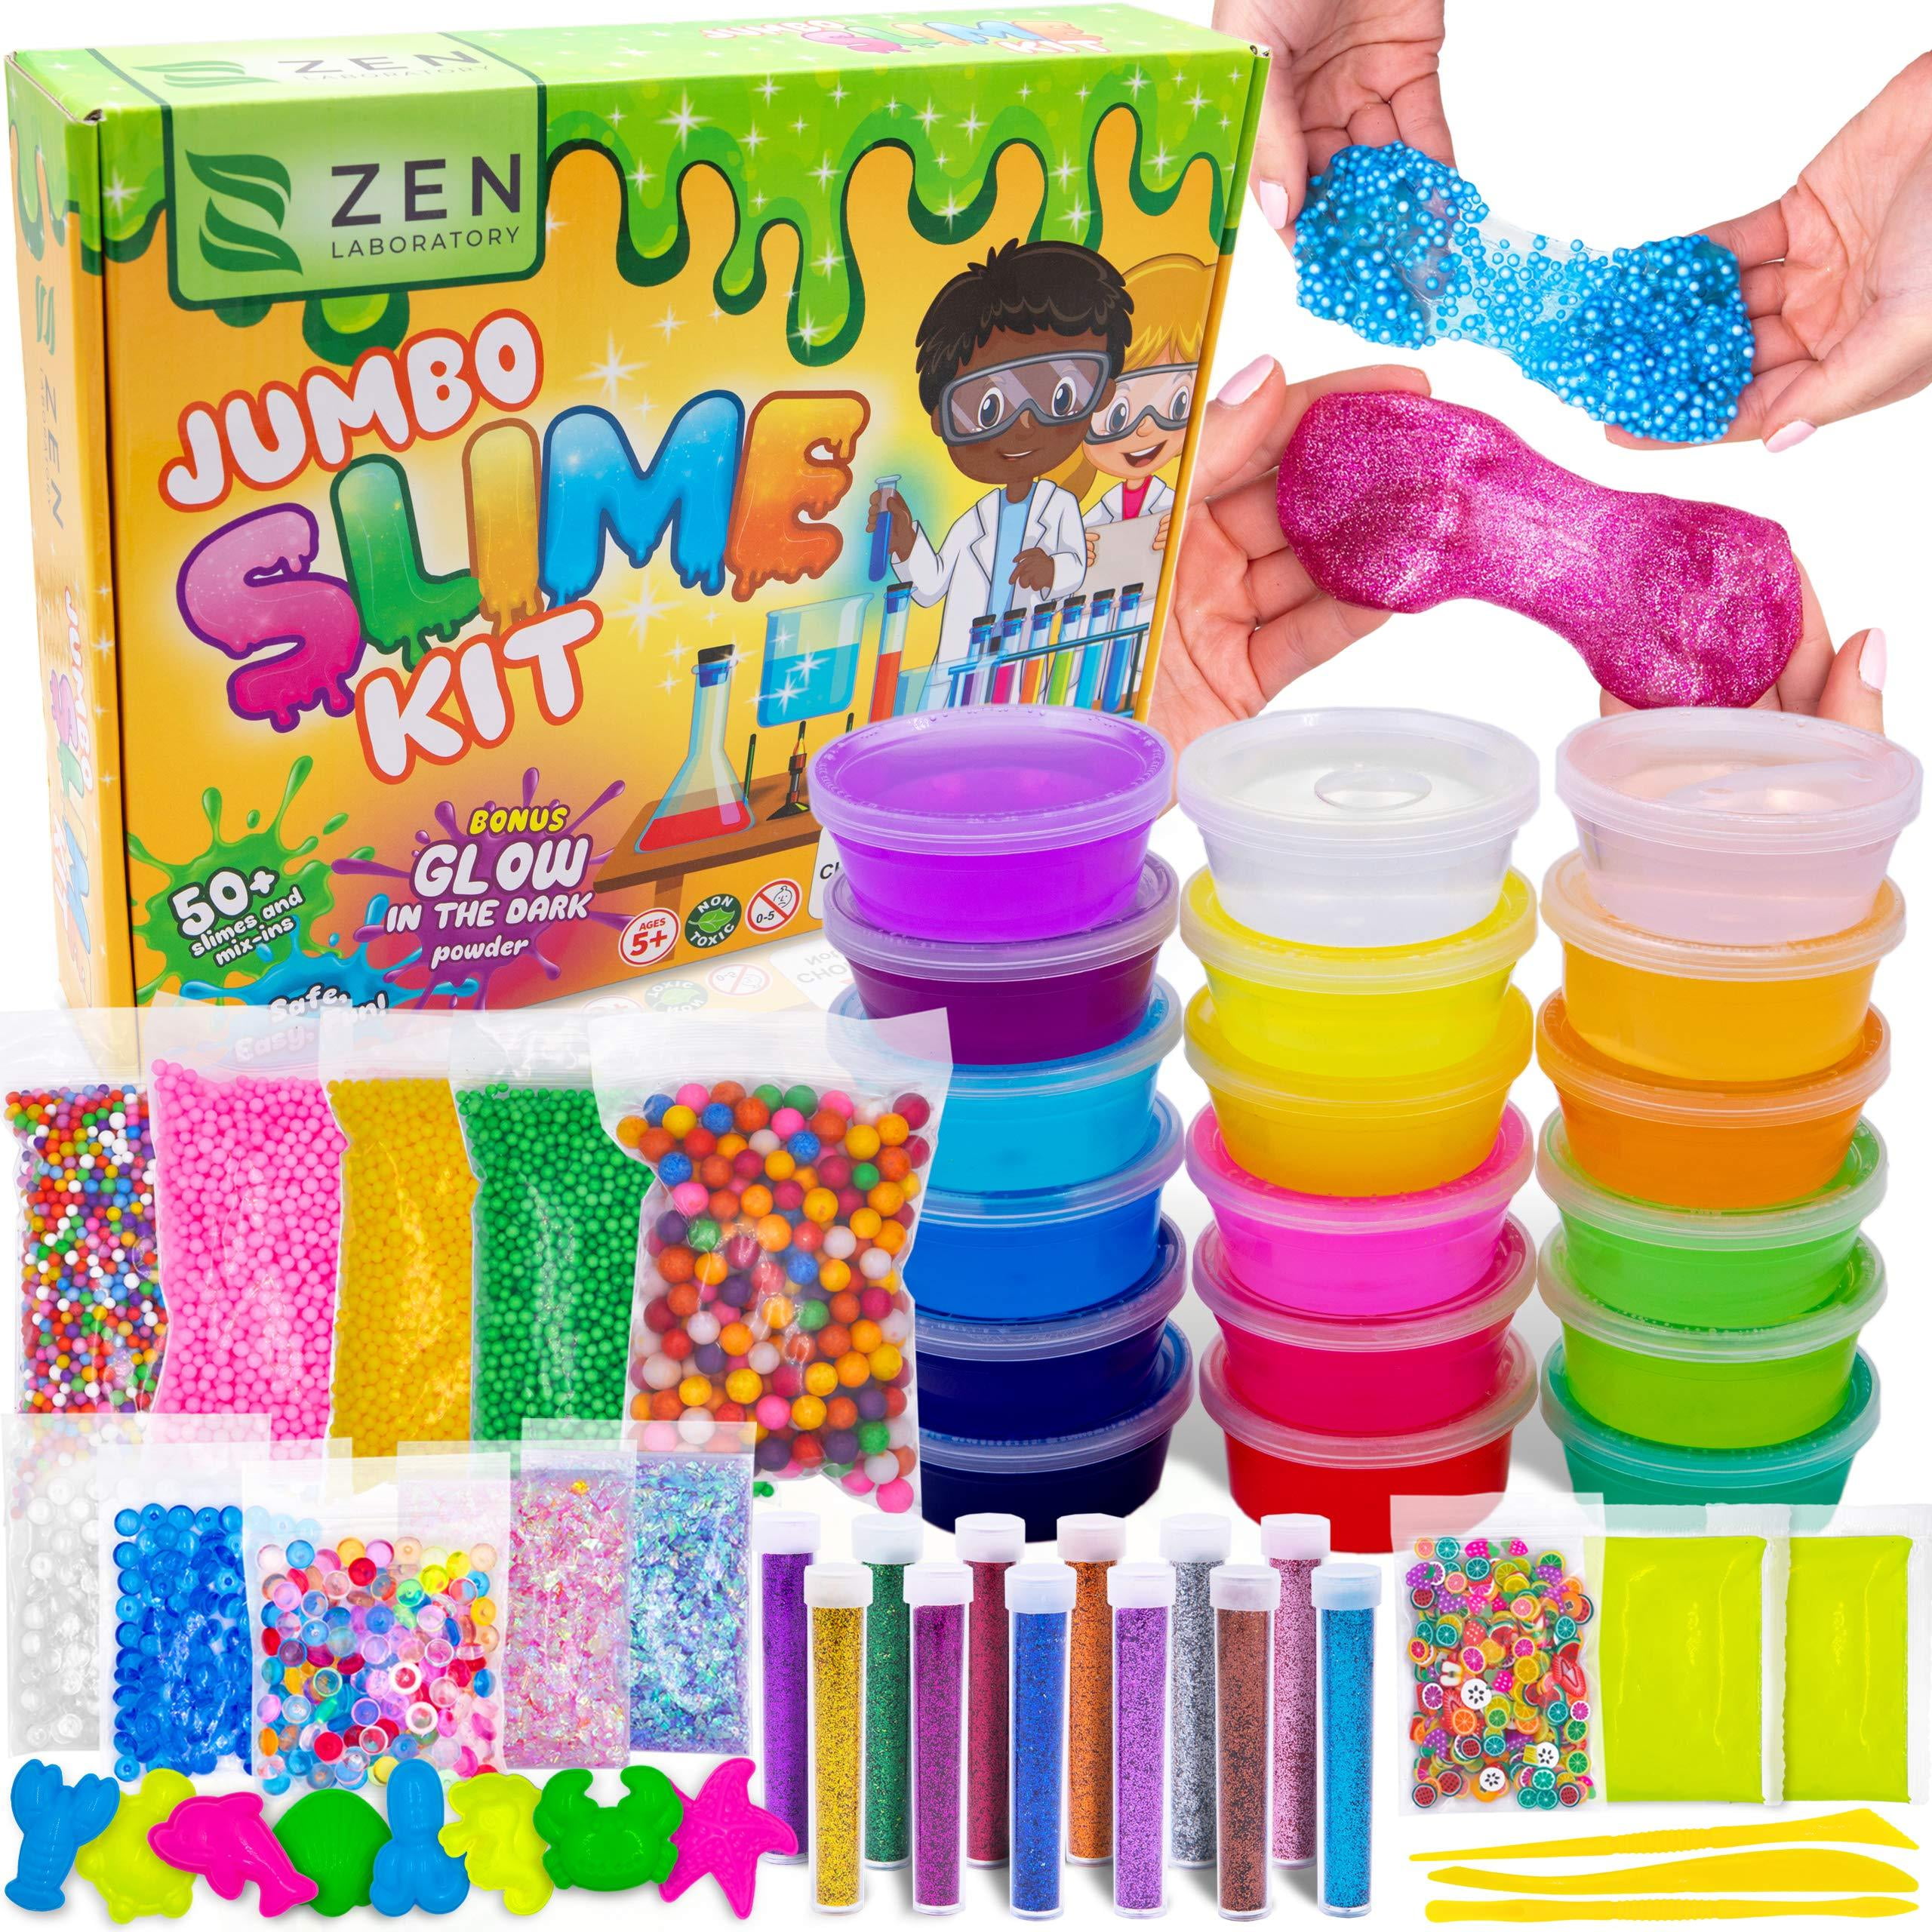 Details about  / 110 Pcs Slime Kit for Girls Boys Kids Age 5+,Air Dry Clay and Crystal Slime,Toys